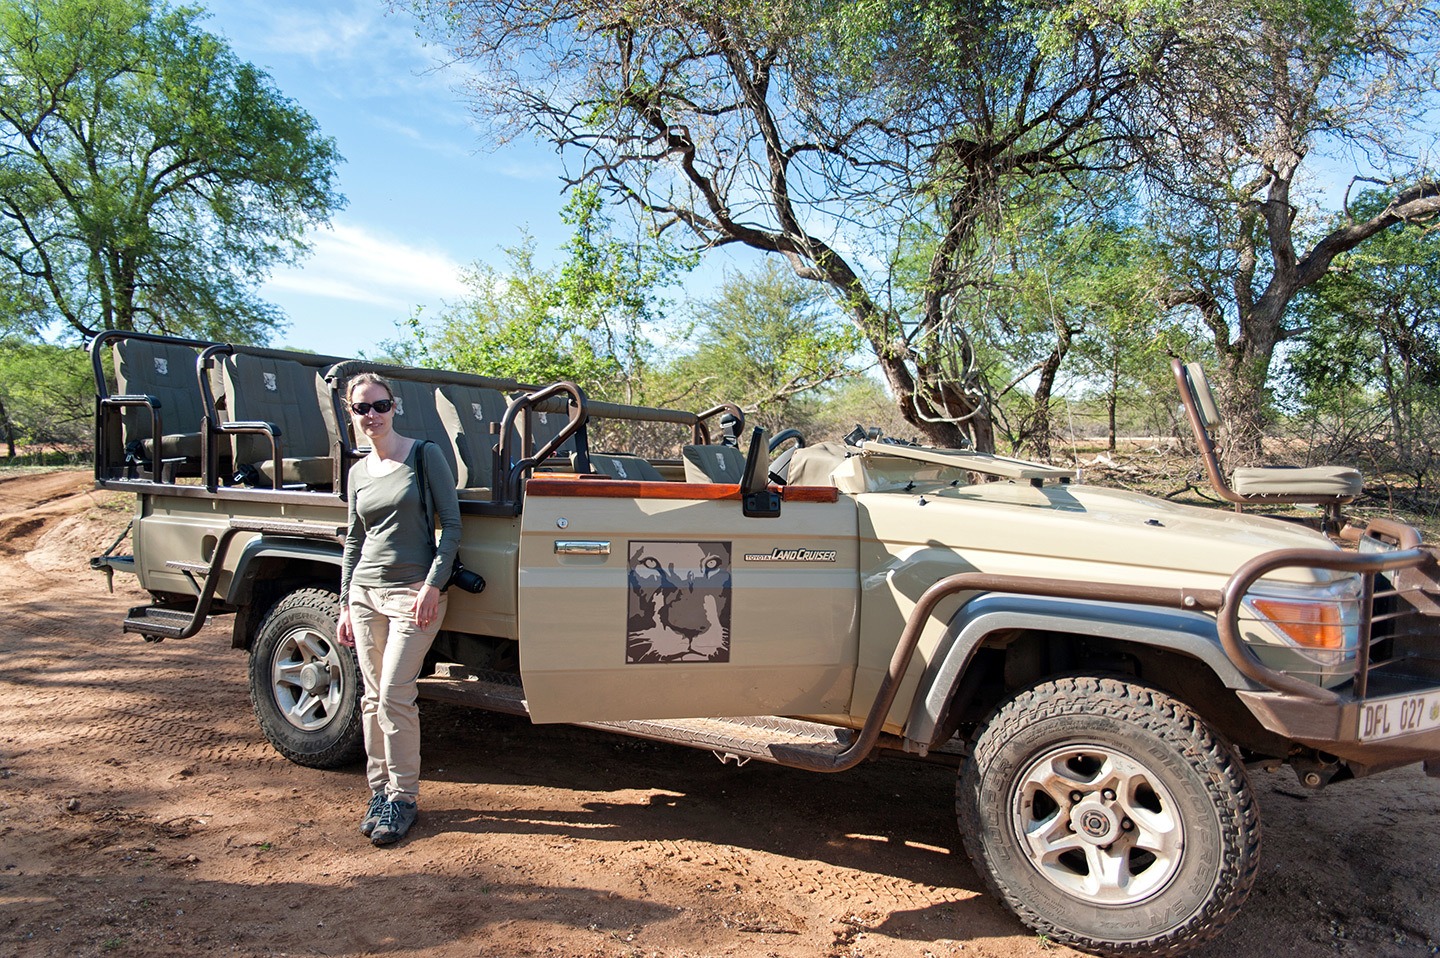 On safari in South Africa – a jeep in the bush